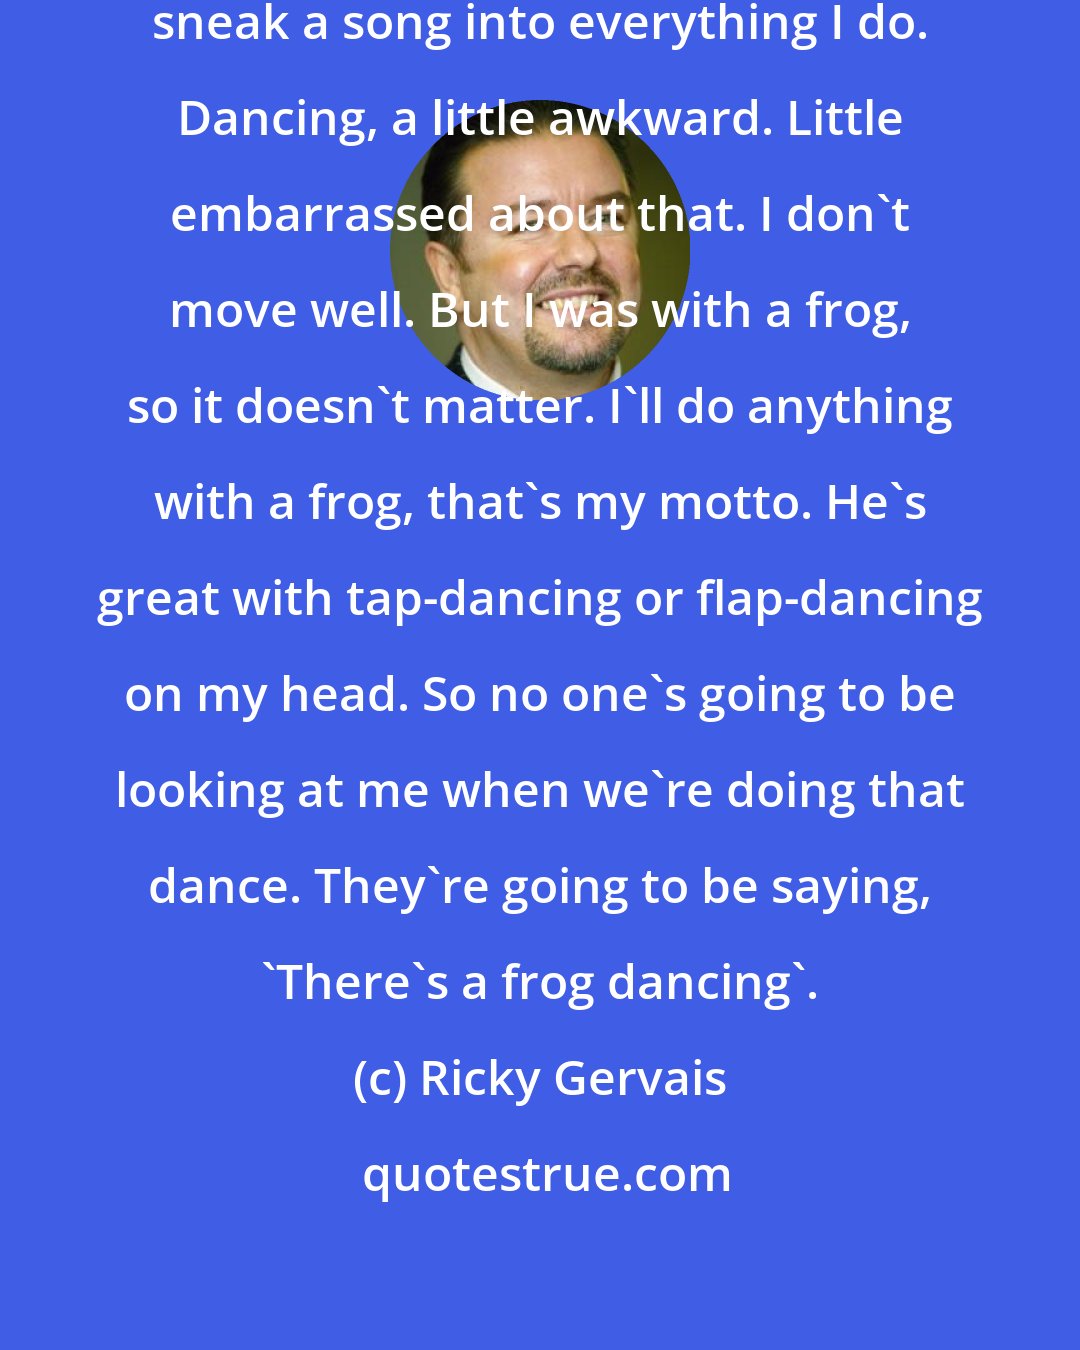 Ricky Gervais: I was okay with singing. I always sneak a song into everything I do. Dancing, a little awkward. Little embarrassed about that. I don't move well. But I was with a frog, so it doesn't matter. I'll do anything with a frog, that's my motto. He's great with tap-dancing or flap-dancing on my head. So no one's going to be looking at me when we're doing that dance. They're going to be saying, 'There's a frog dancing'.